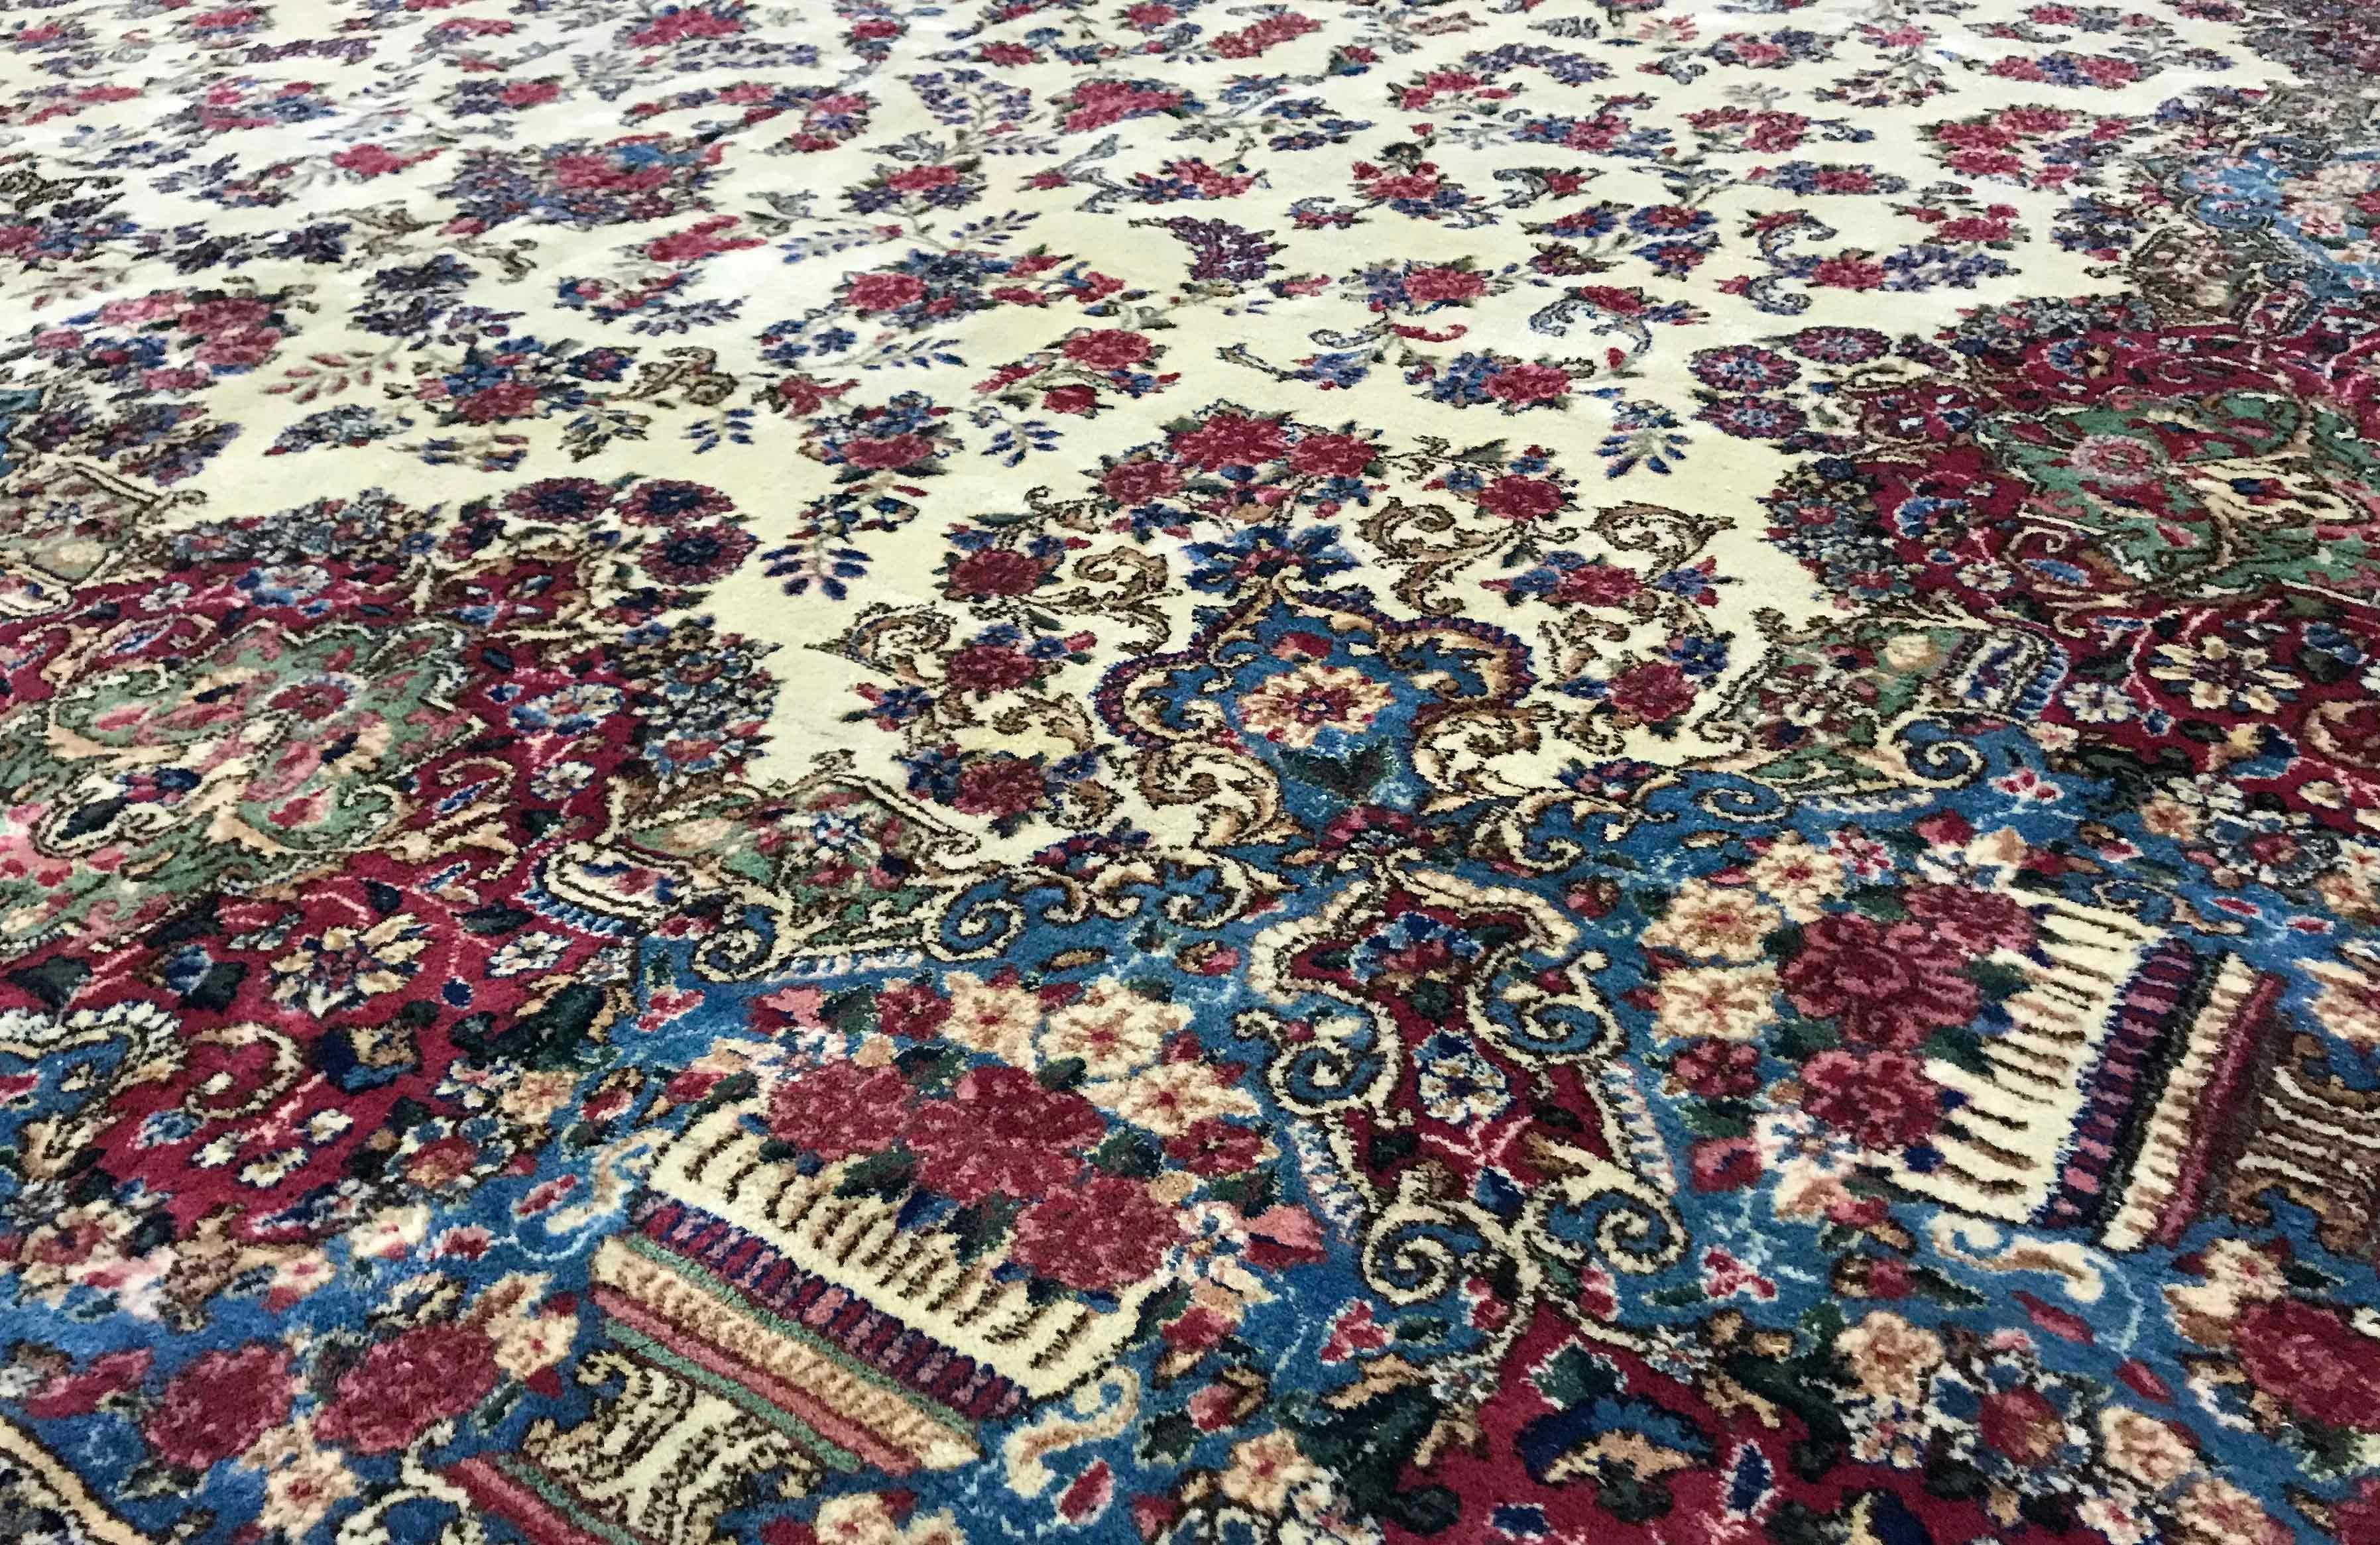 Vintage Persian Kerman rug, circa 1940. This rug has a wonderfully soft central filed, filled with floral designs surrounding a central medallion in soft blues that extends into the border to create a relaxed and gentle feel to this 1940s vintage